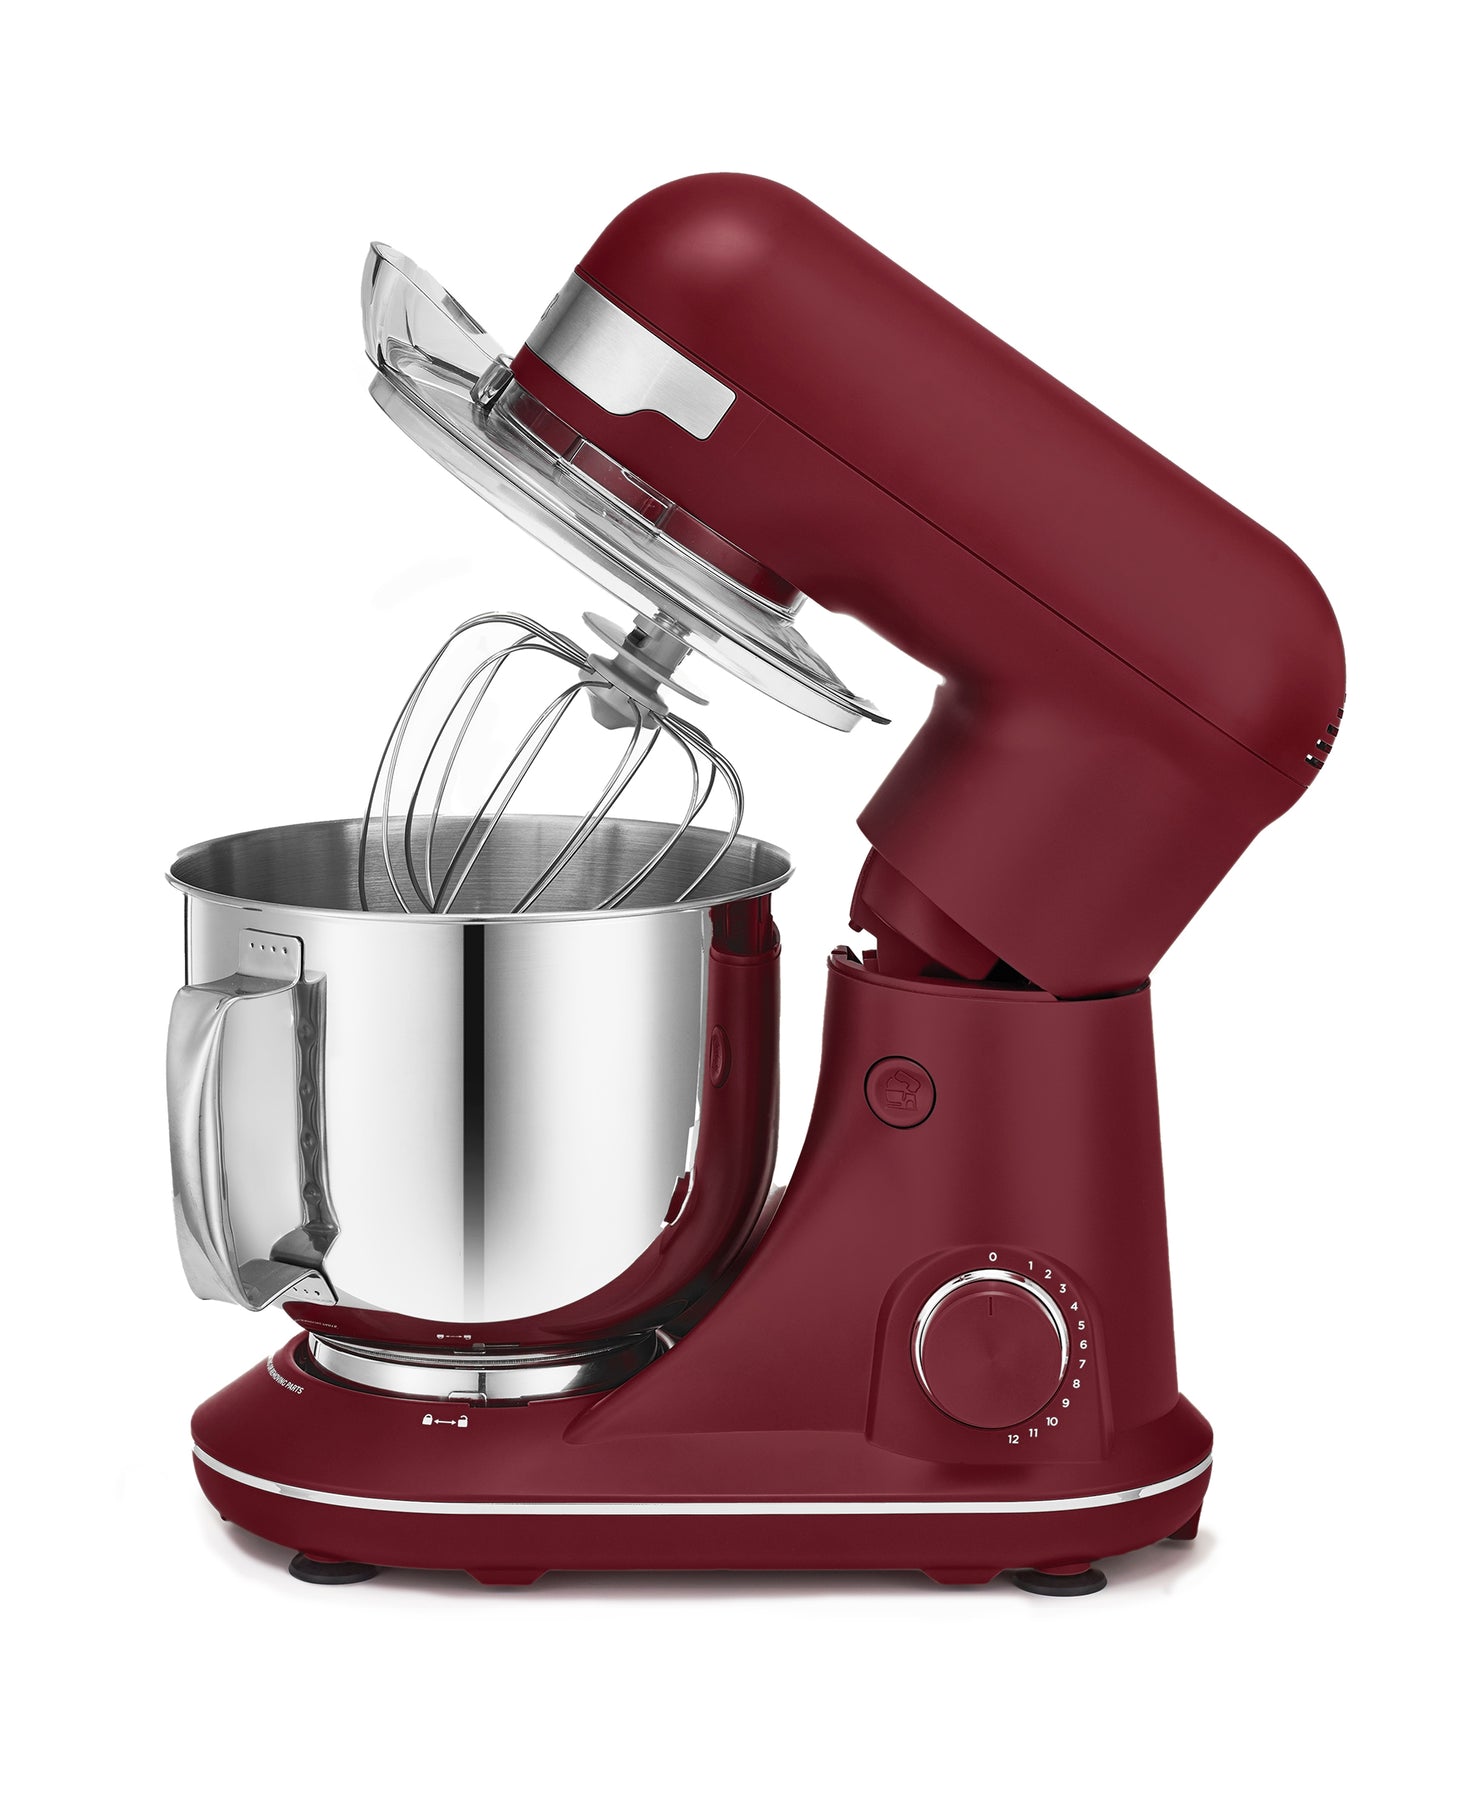 Lightweight Portable Hand Mixer With Dishwasher Safe Beaters for Mixing  Doughs & Batters - Walmart.com